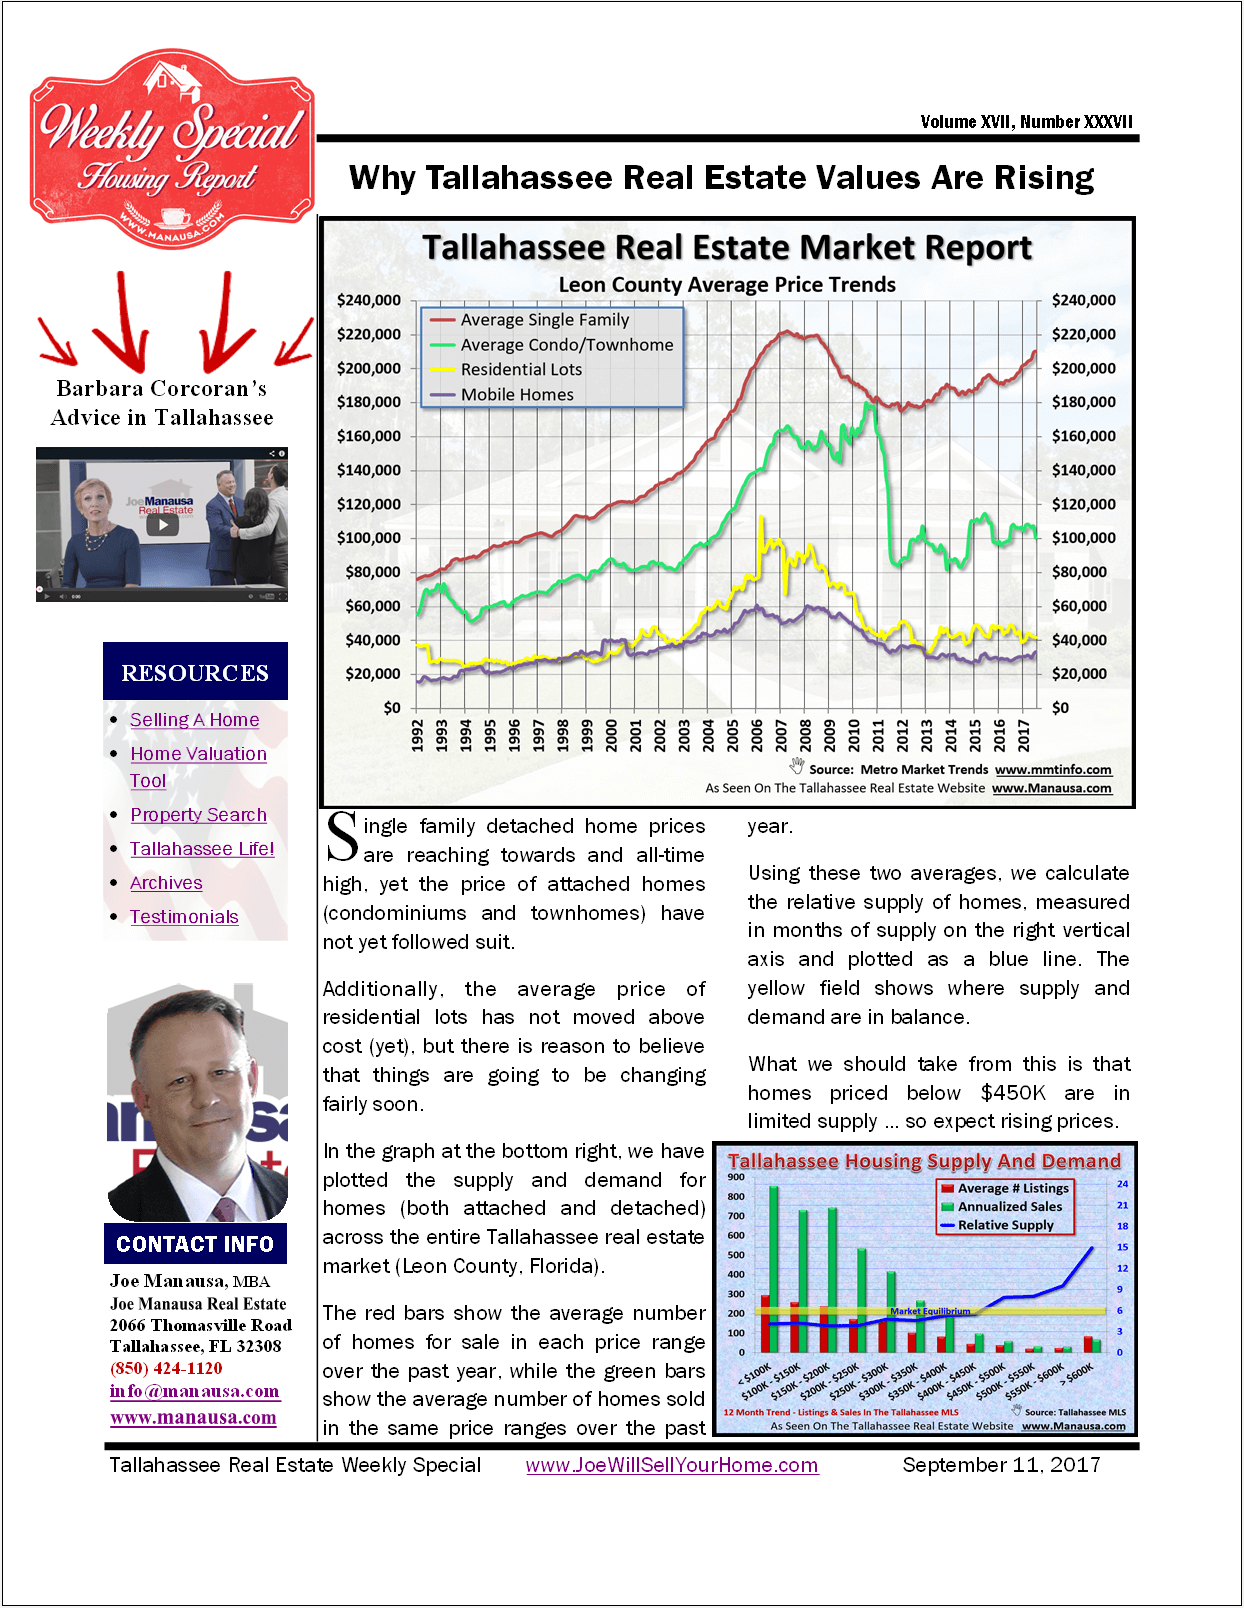 Why Tallahassee Home Prices Are RISING